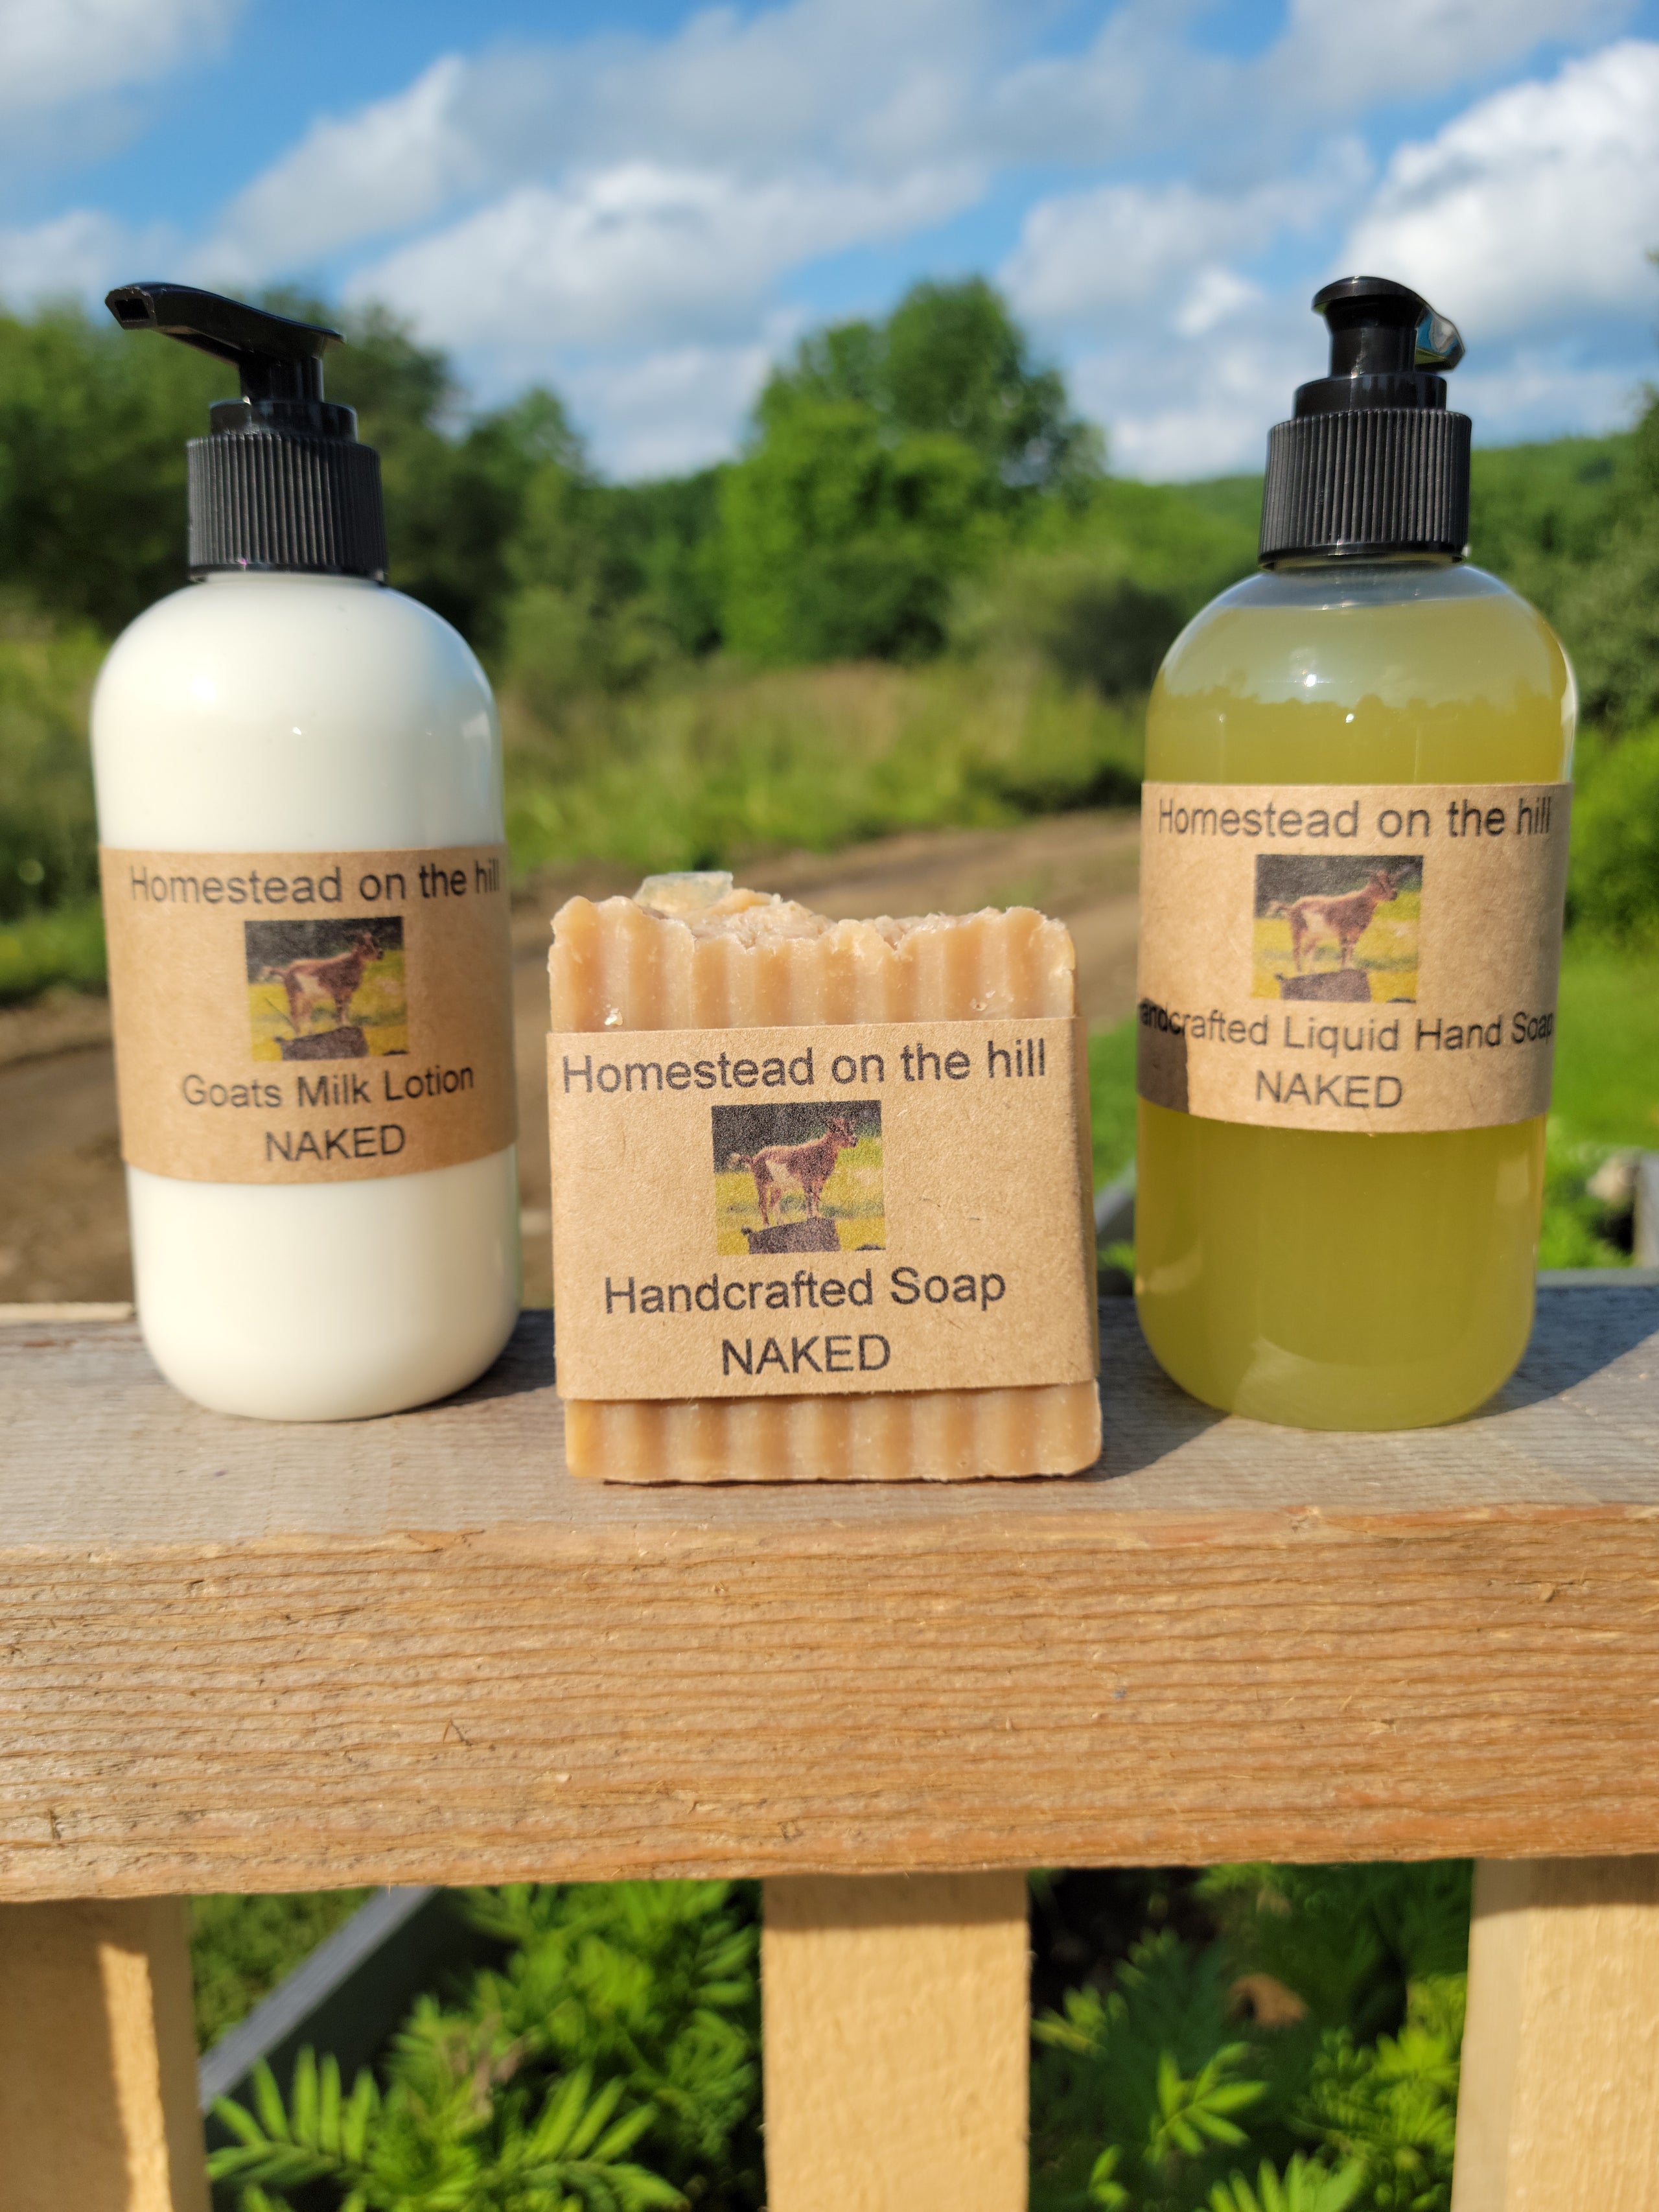 Daytime Buffalo: Homestead on the Hill  Artisan goods made from goat milk  